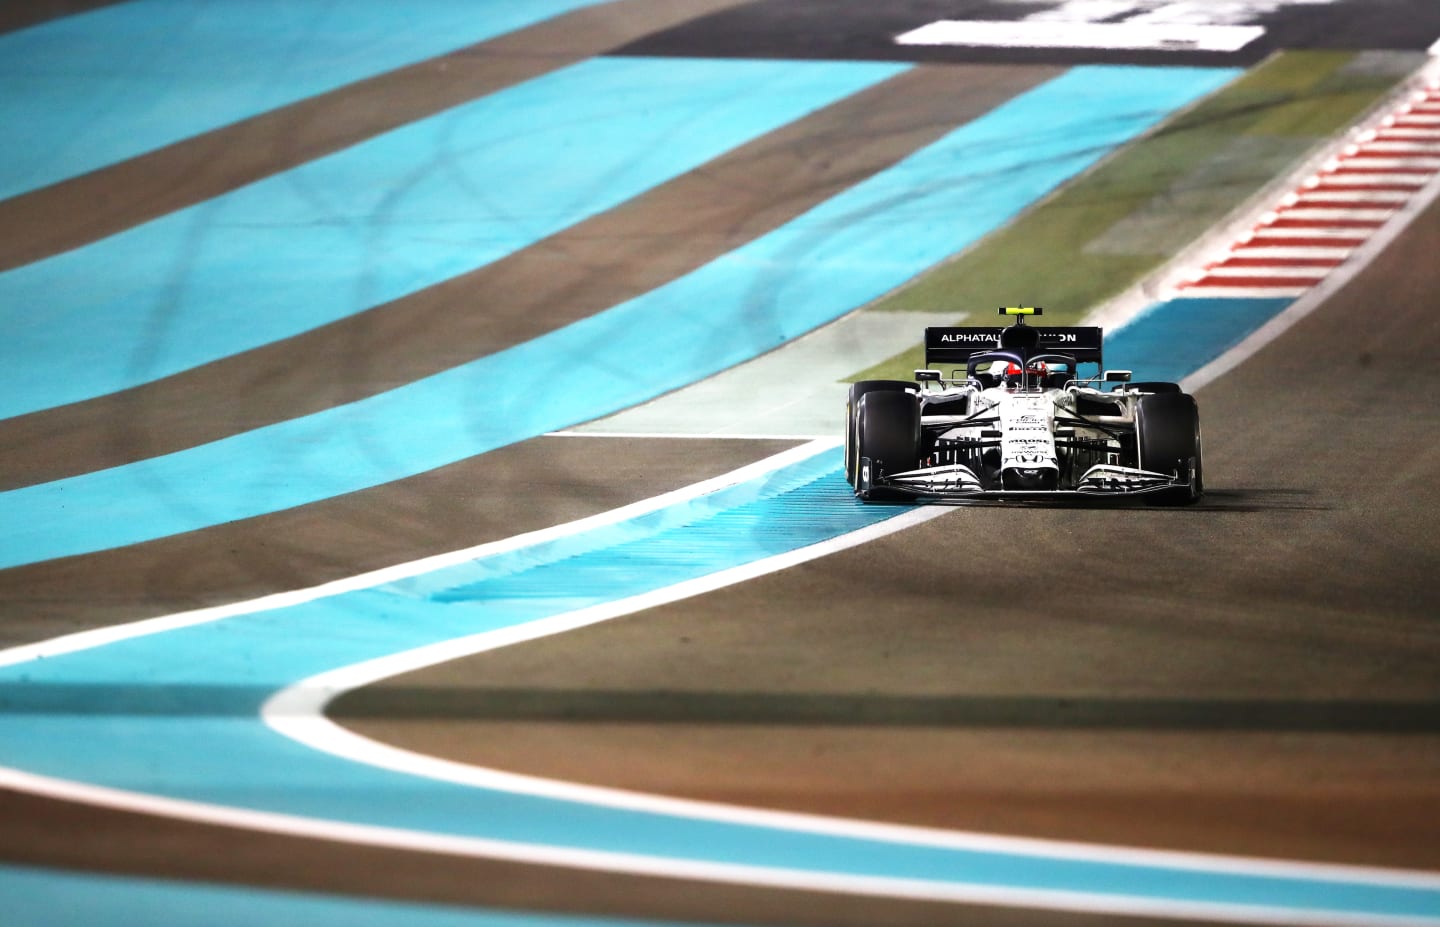 ABU DHABI, UNITED ARAB EMIRATES - DECEMBER 13: Pierre Gasly of France driving the (10) Scuderia AlphaTauri AT01 Honda during the F1 Grand Prix of Abu Dhabi at Yas Marina Circuit on December 13, 2020 in Abu Dhabi, United Arab Emirates. (Photo by Bryn Lennon/Getty Images)